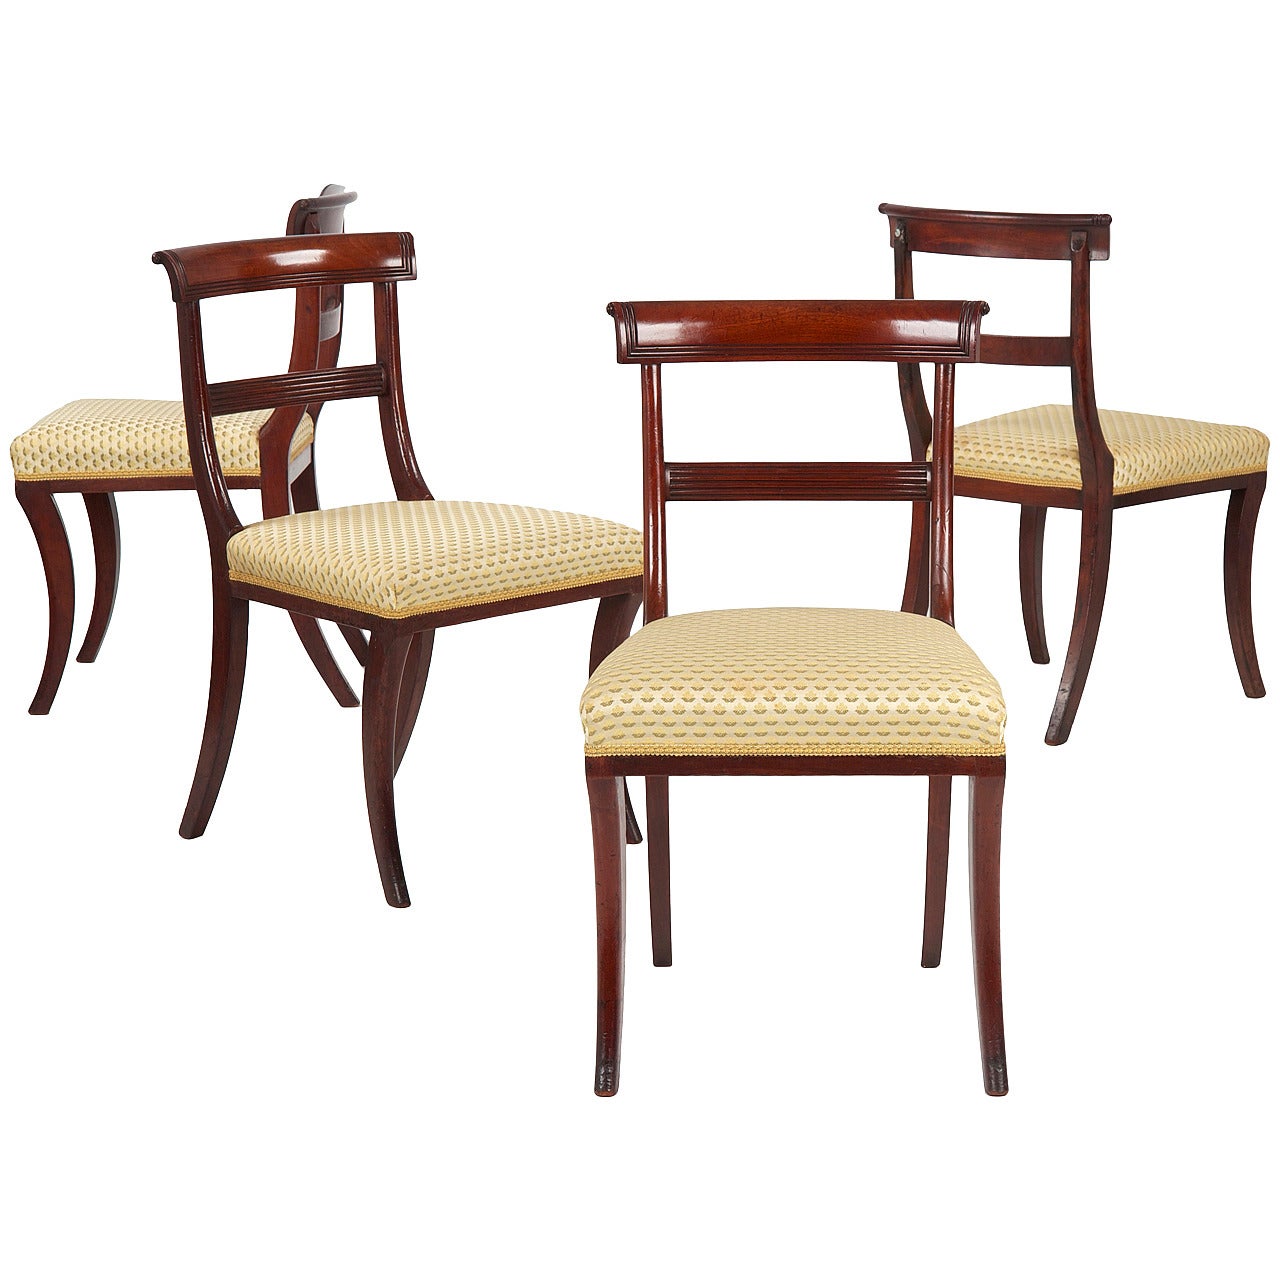 19th Century Set of Four English Regency Antique Dining Chairs, circa 1810-20